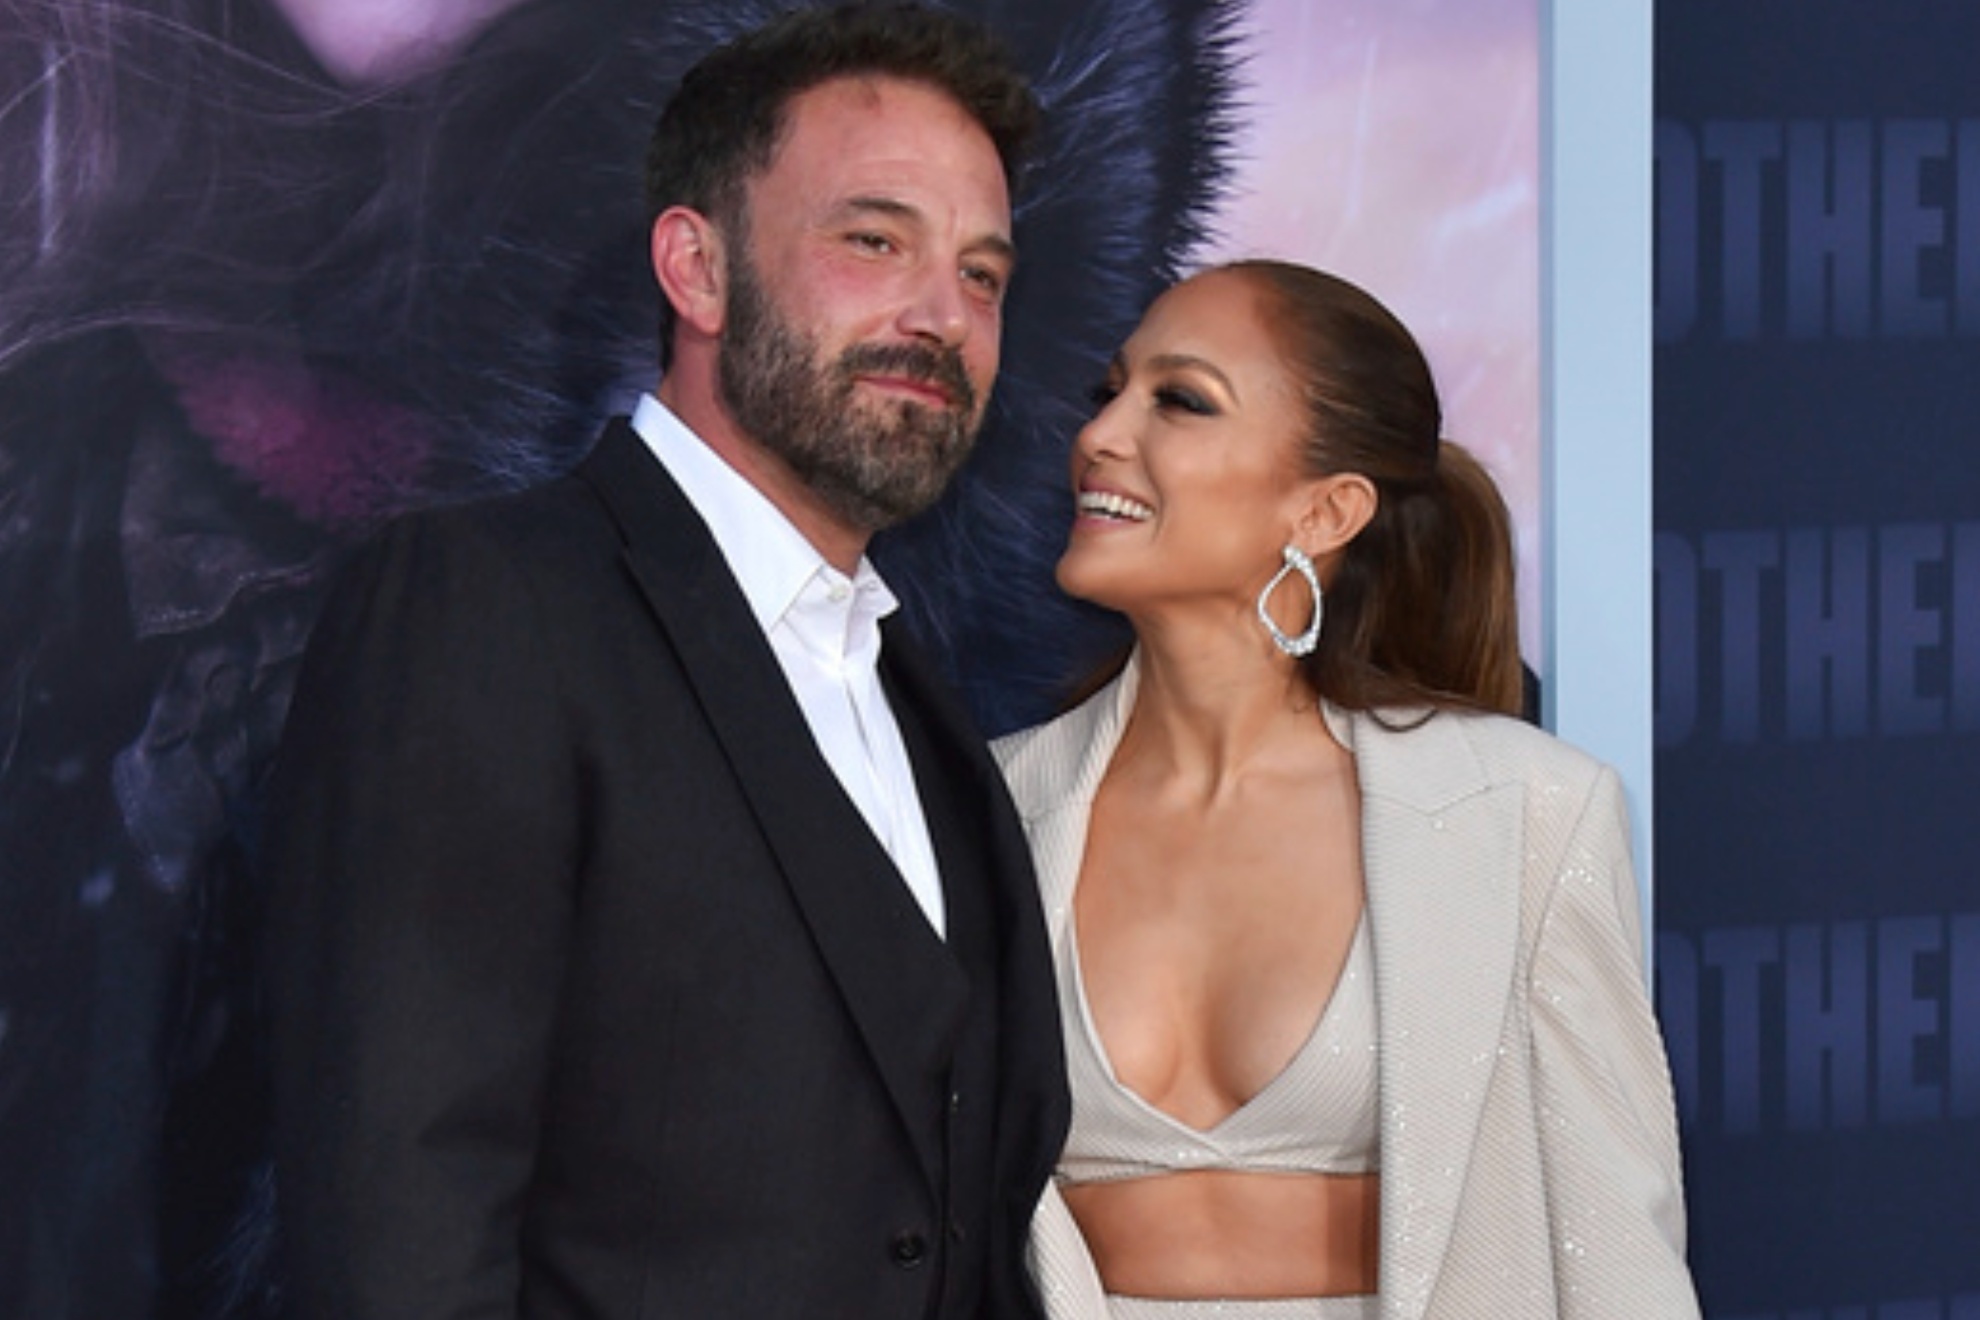 Ben Affleck and Jennifer Lopez have been married for more than one year